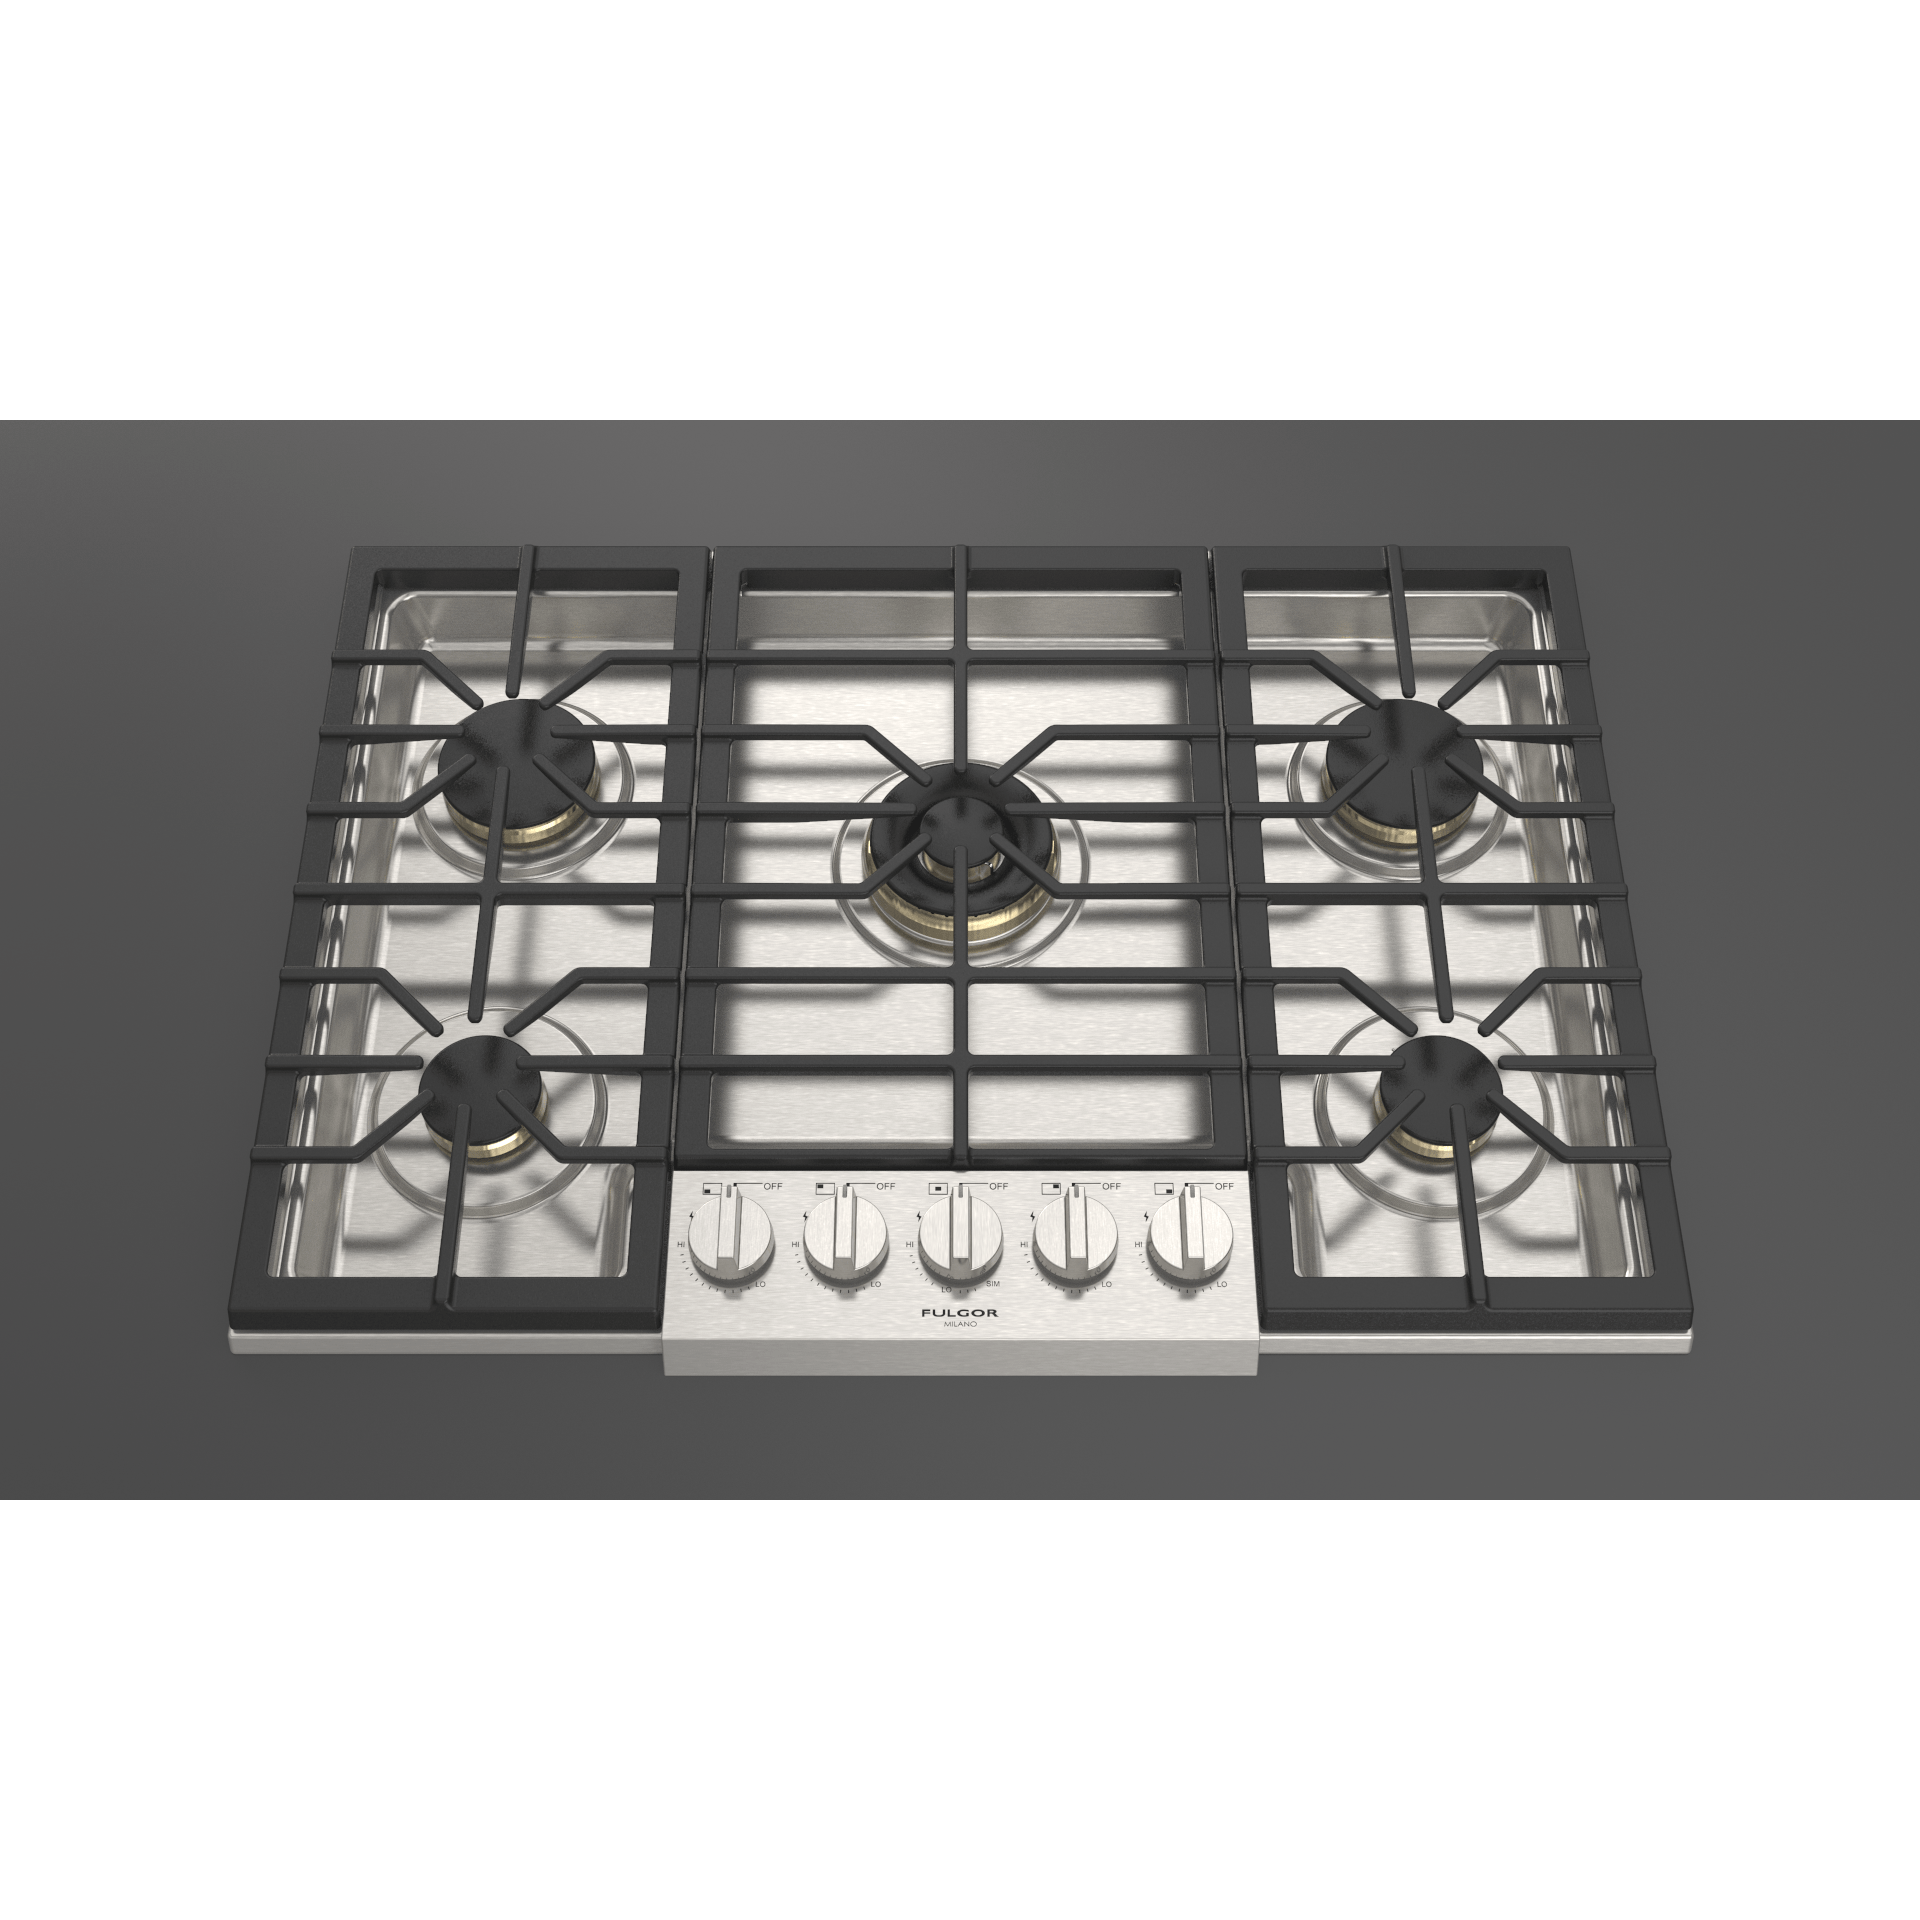 Fulgor Milano 30" Pro-Style Natural Gas Cooktop with 1 Center Dual Burner - F6PGK305S1 Cooktops F6PGK305S1 Luxury Appliances Direct